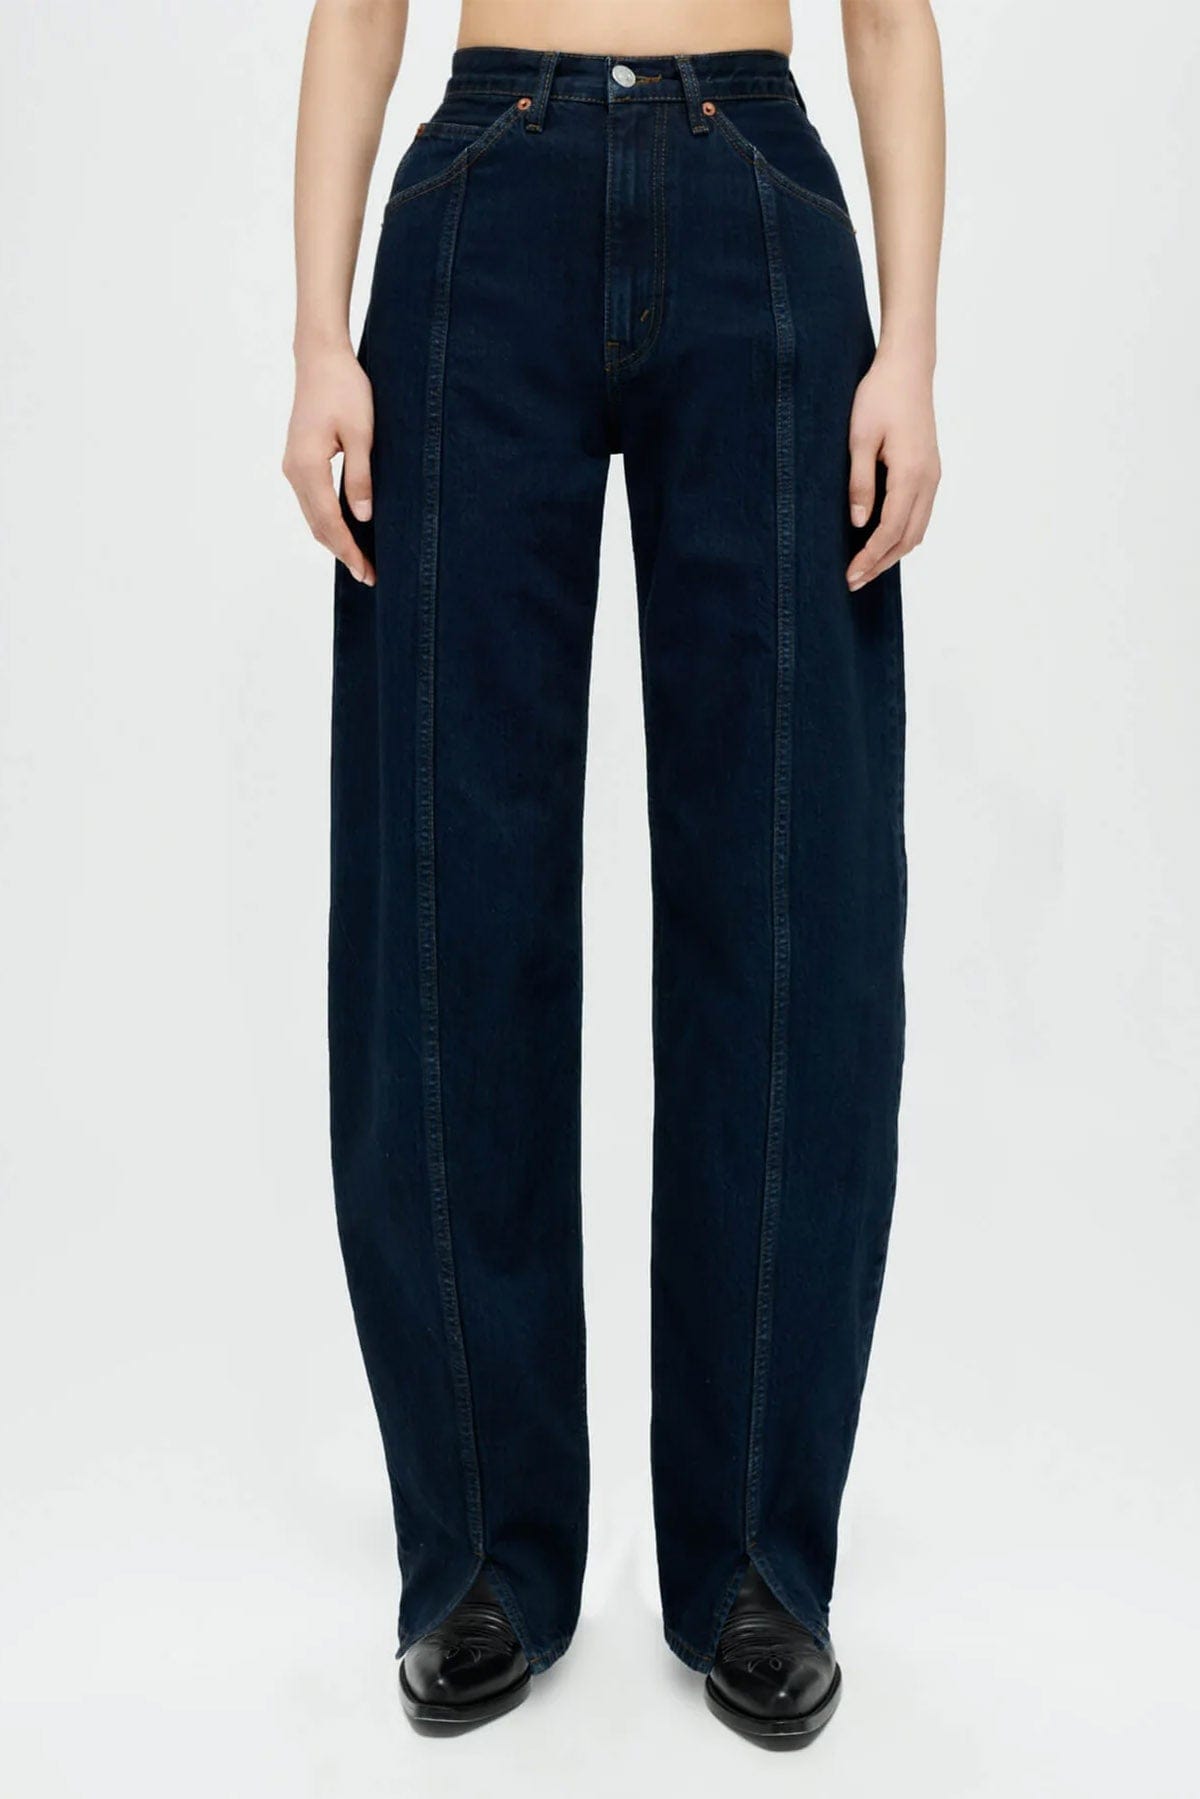 RE/DONE PANTALONE IN DENIM  BLU NAVY / 23 Jeans Donna Re/Done Tailored Jean